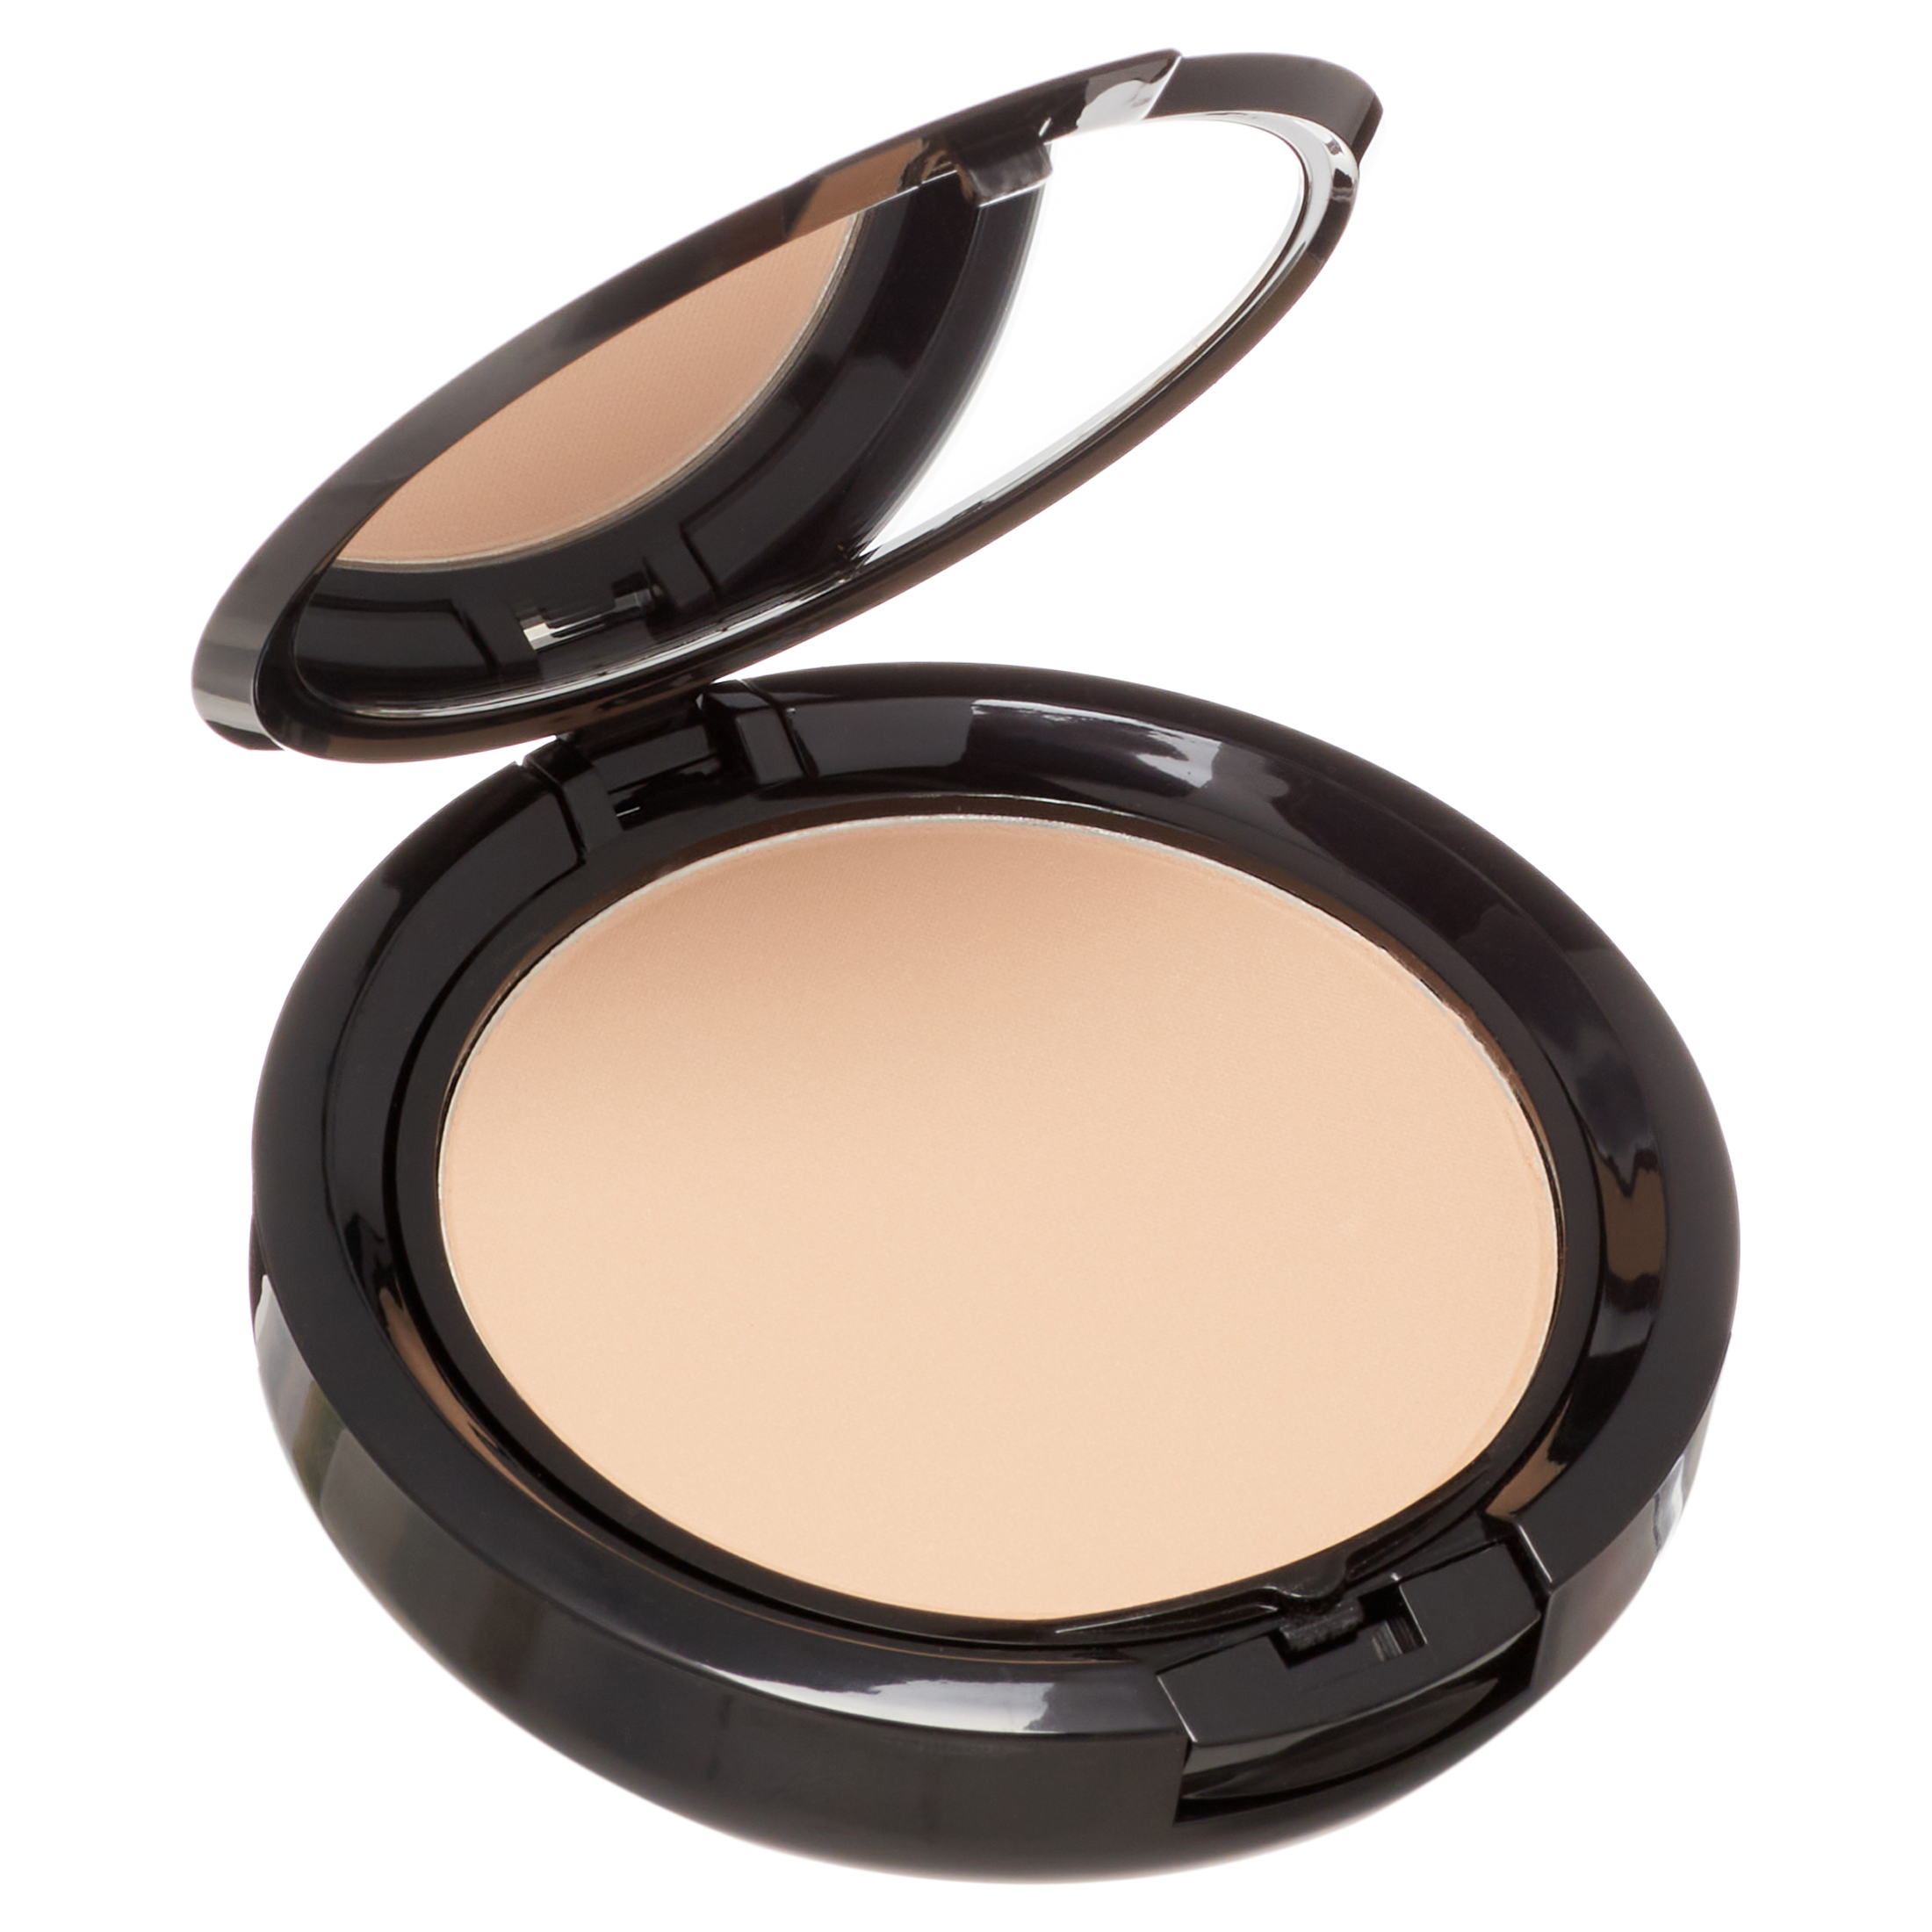 NYX Professional Makeup Stay Matte but not Flat Powder Foundation, Nude 0.26 oz - image 4 of 9